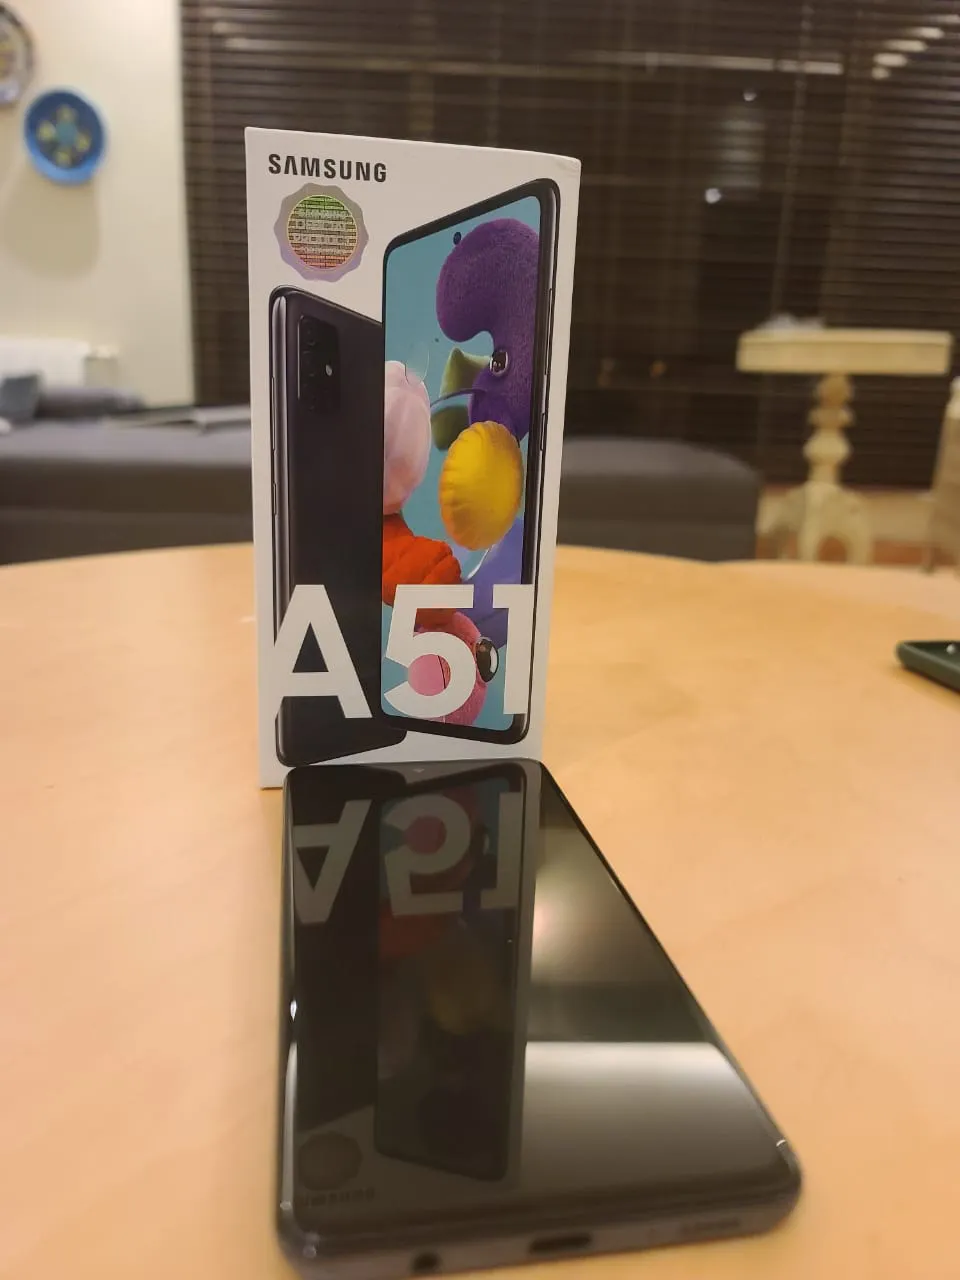 Samsung A51 for sale - photo 1